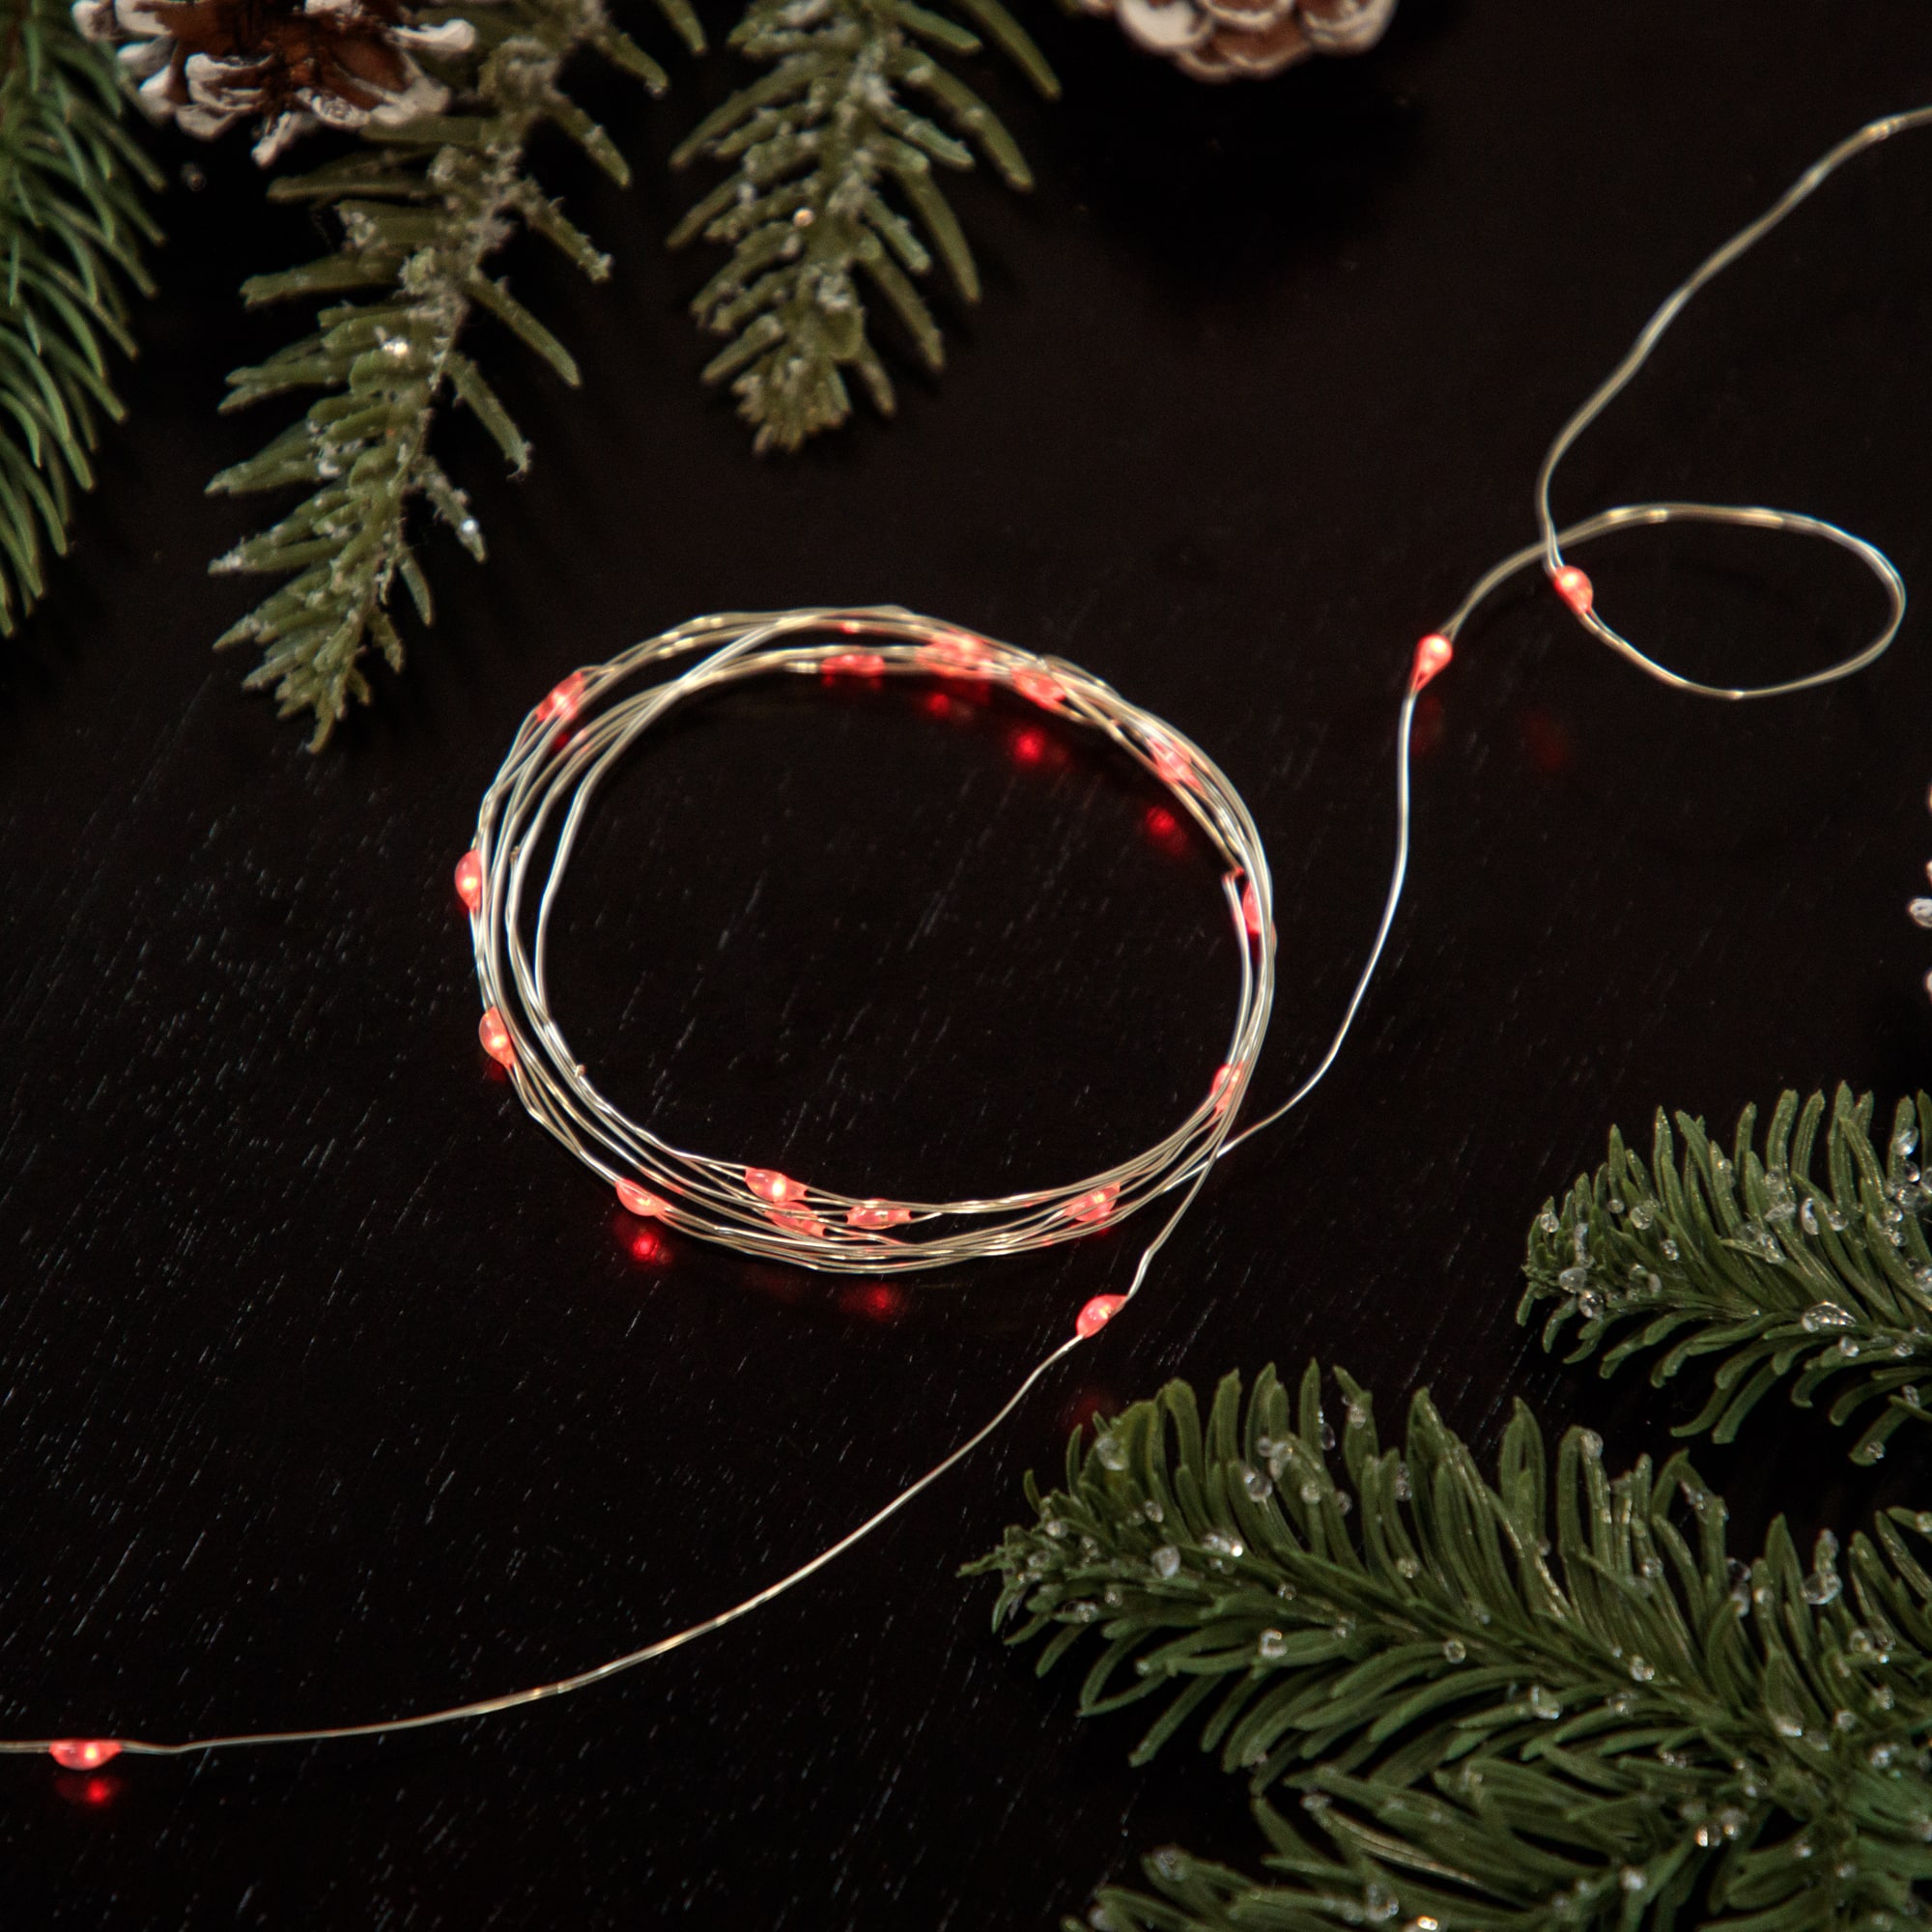 100ct. Red LED Micro Fairy String Lights with Copper Wire